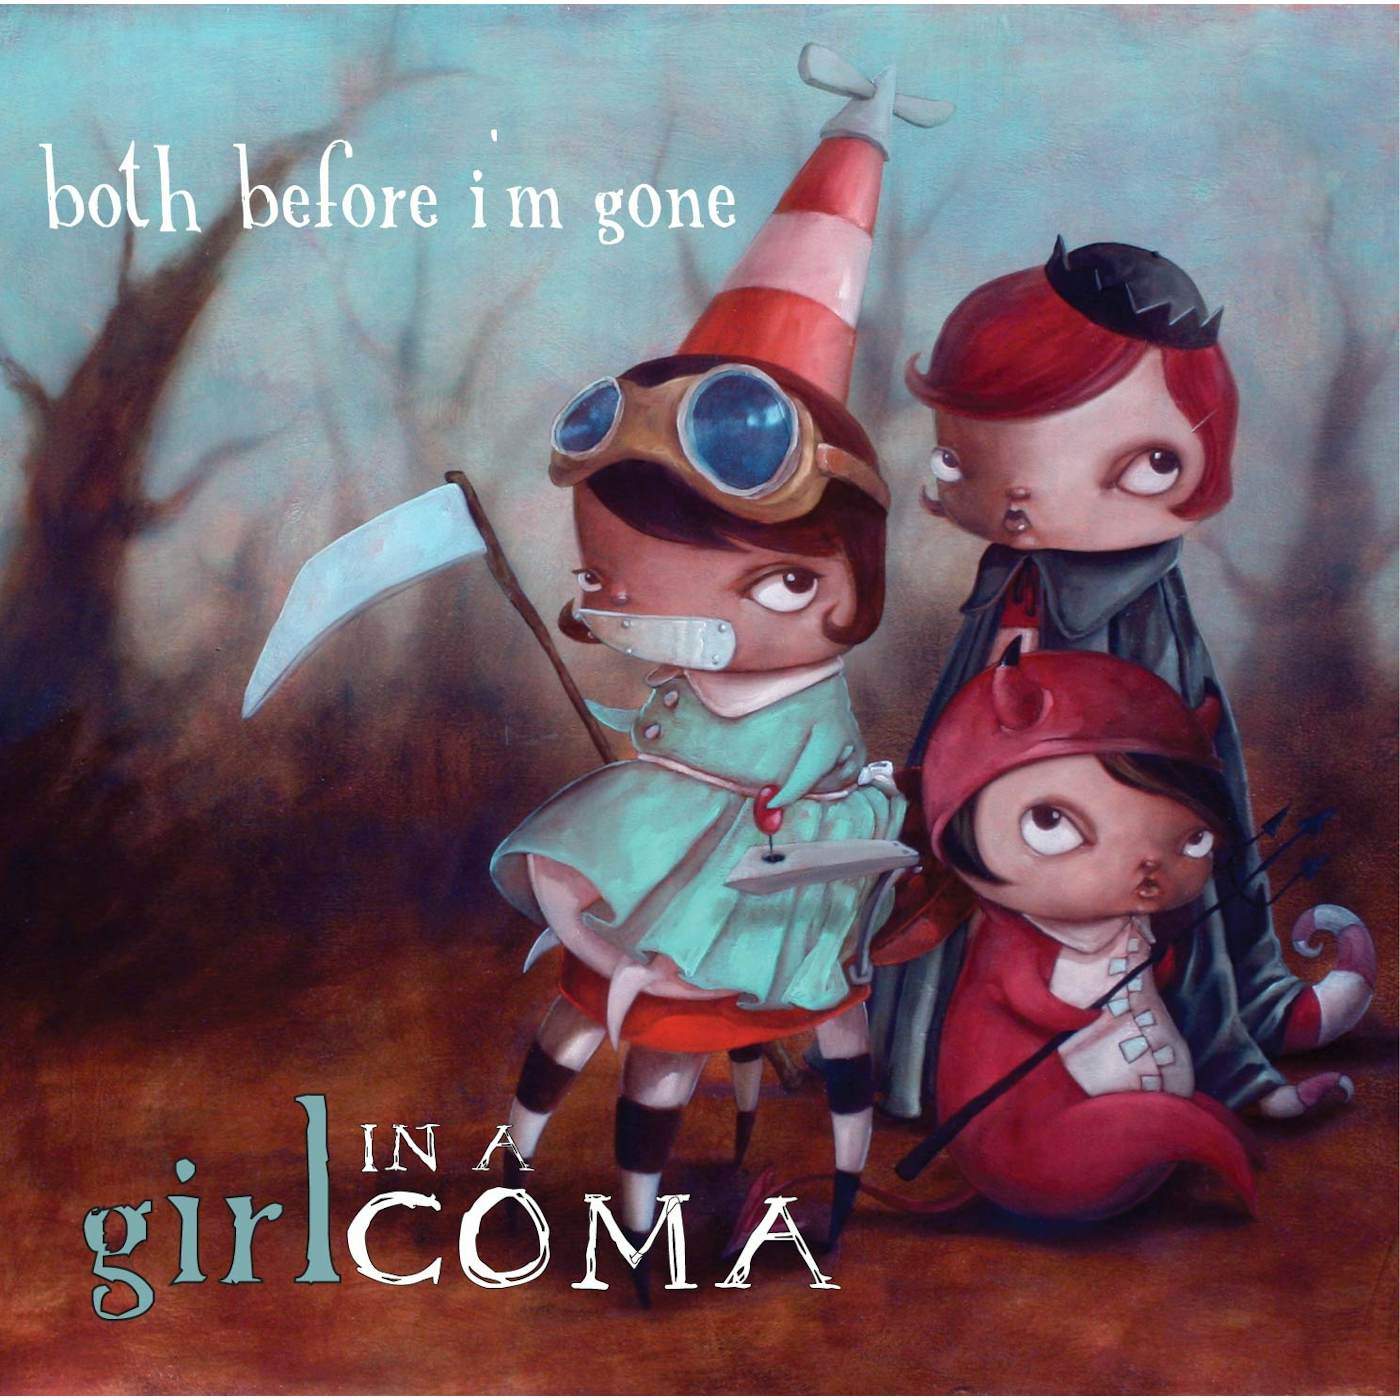 Girl In a Coma BOTH BEFORE I'M GONE CD